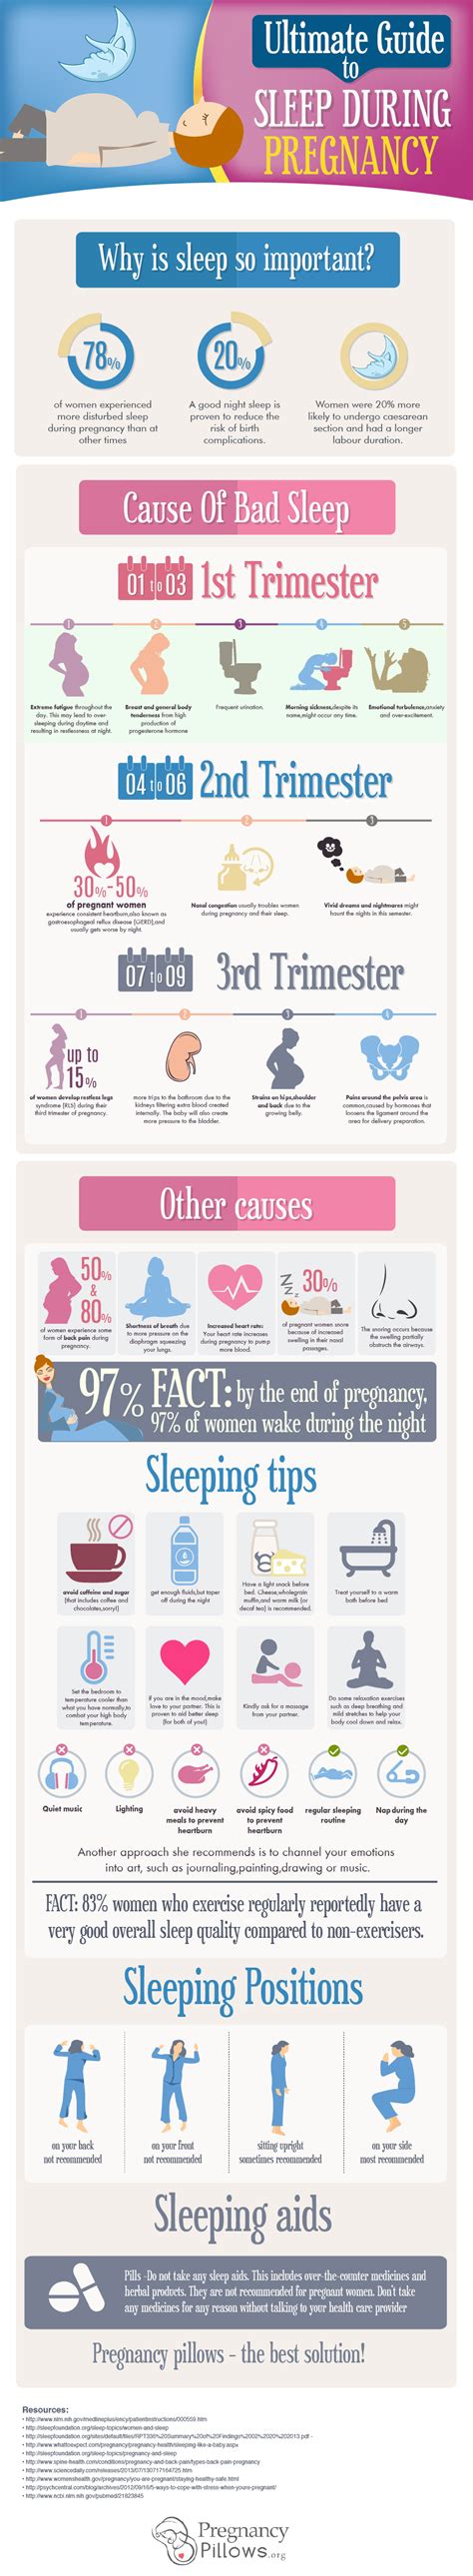 ultimate guide to sleep during pregnancy [infographic] sleep pregnancy infographic